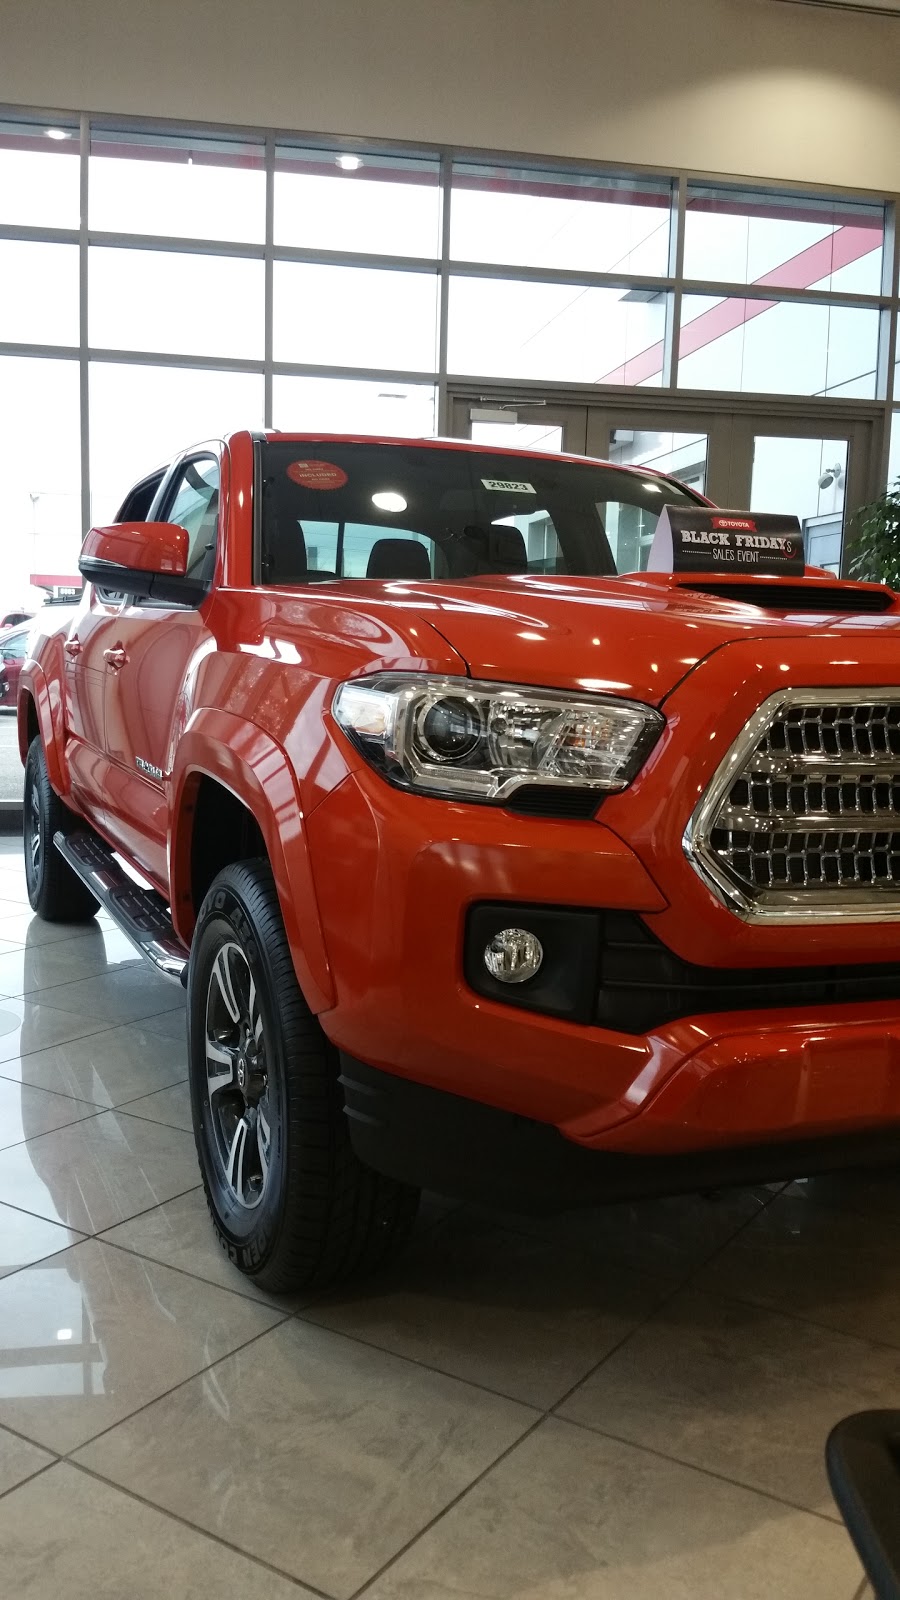 Beck Toyota | 8055 US-31, Indianapolis, IN 46227, USA | Phone: (317) 882-2600